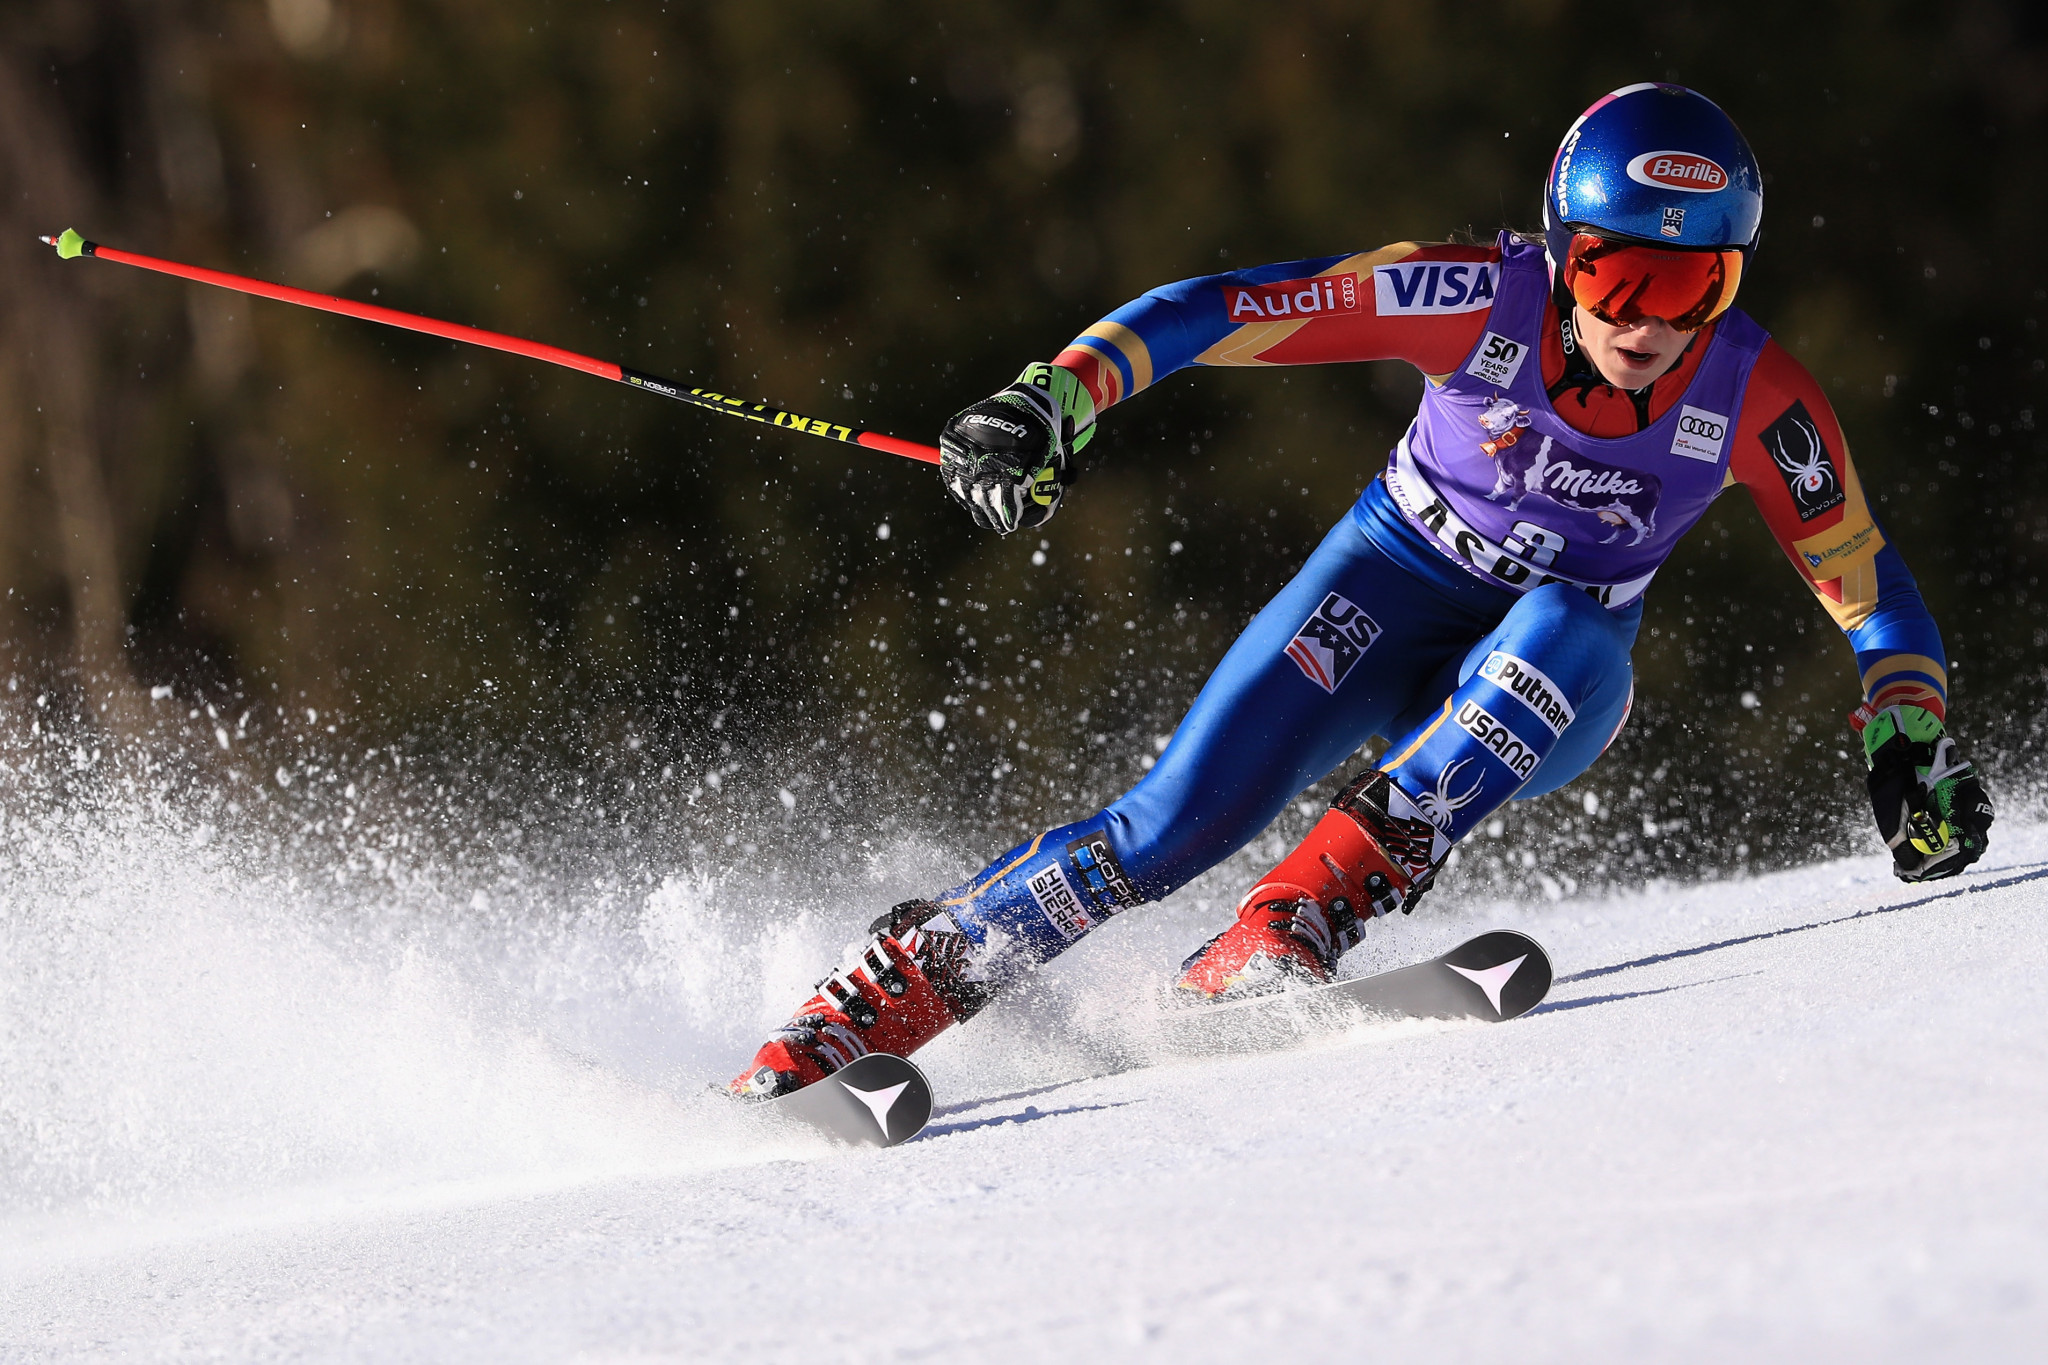 One of the stand-out names on the team is American Alpine skier Mikaela Shiffrin ©Getty Images